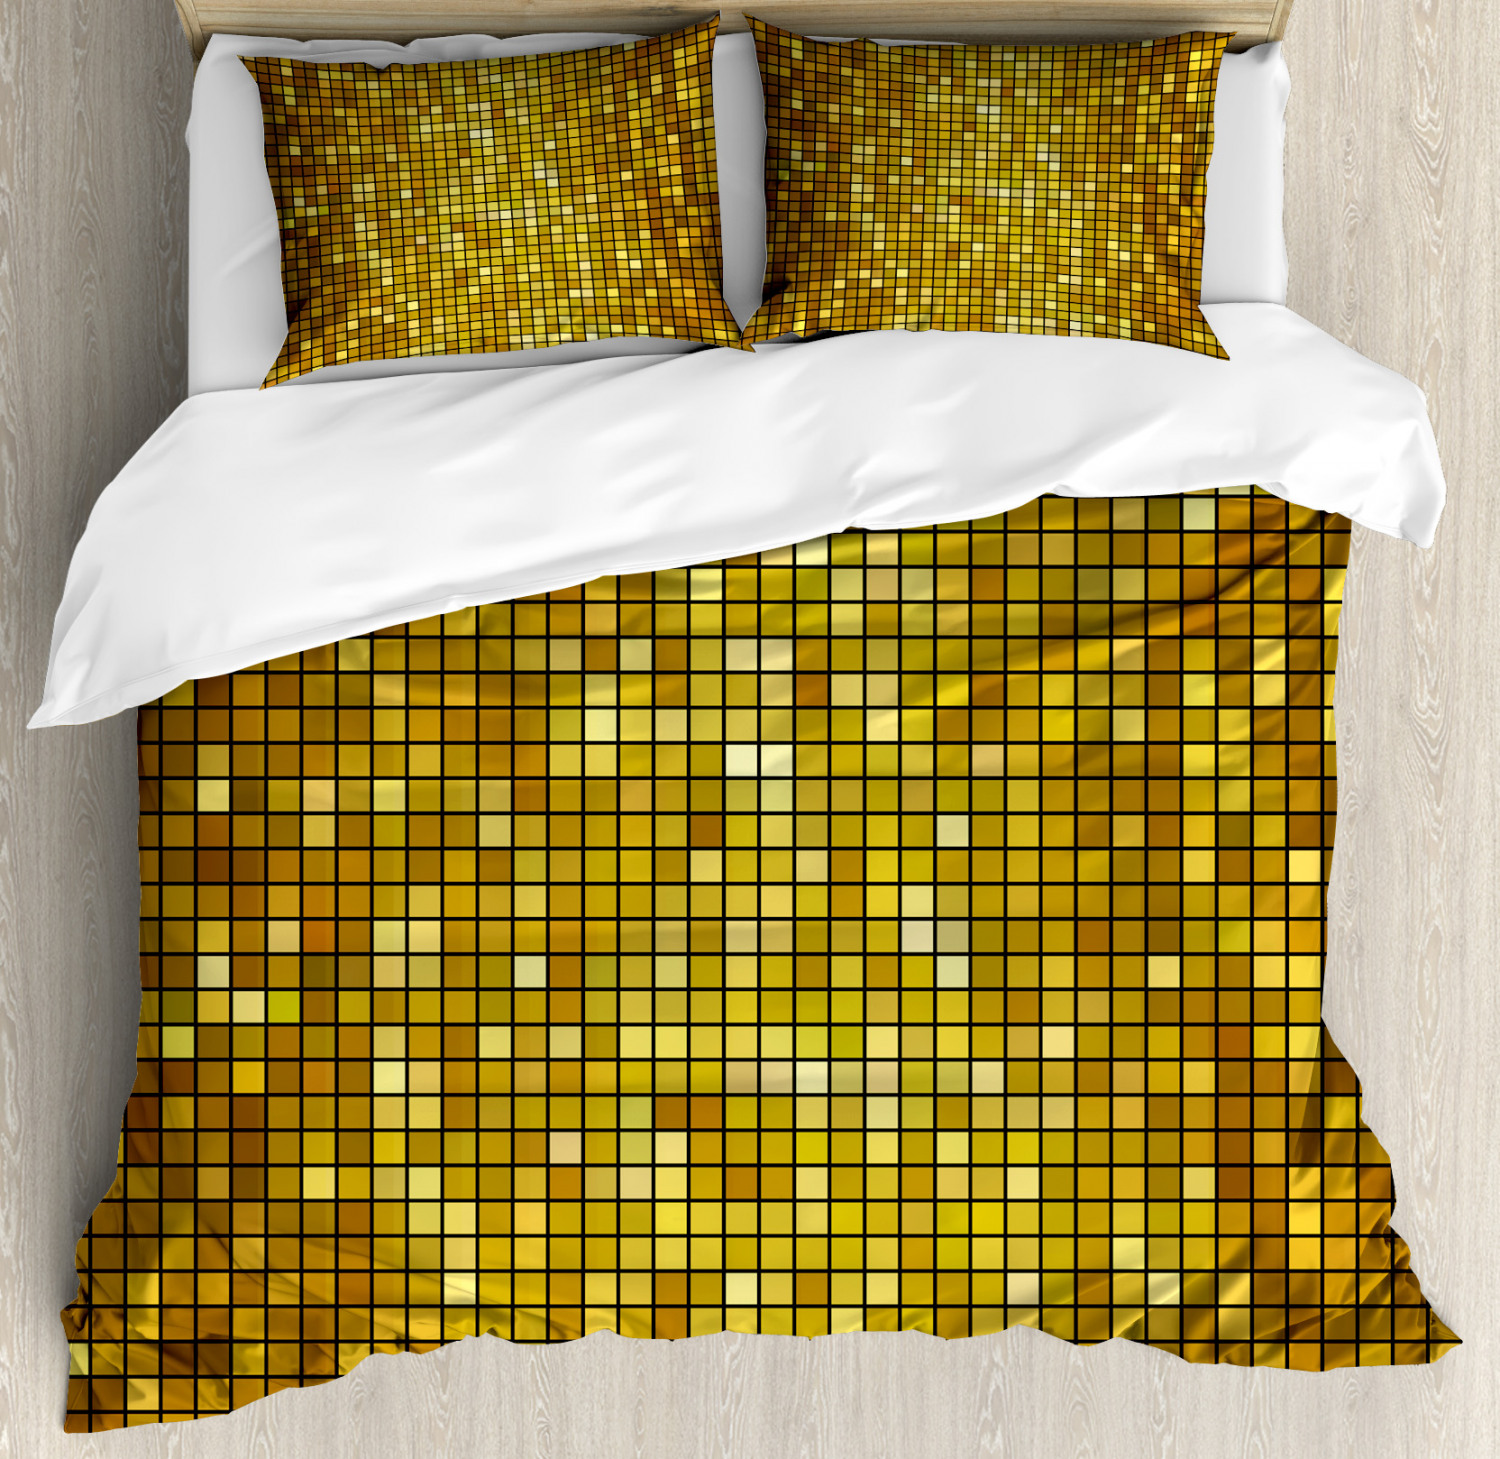 Marigold Duvet Cover Set With Pillow Shams Ombre Mosaic Squares